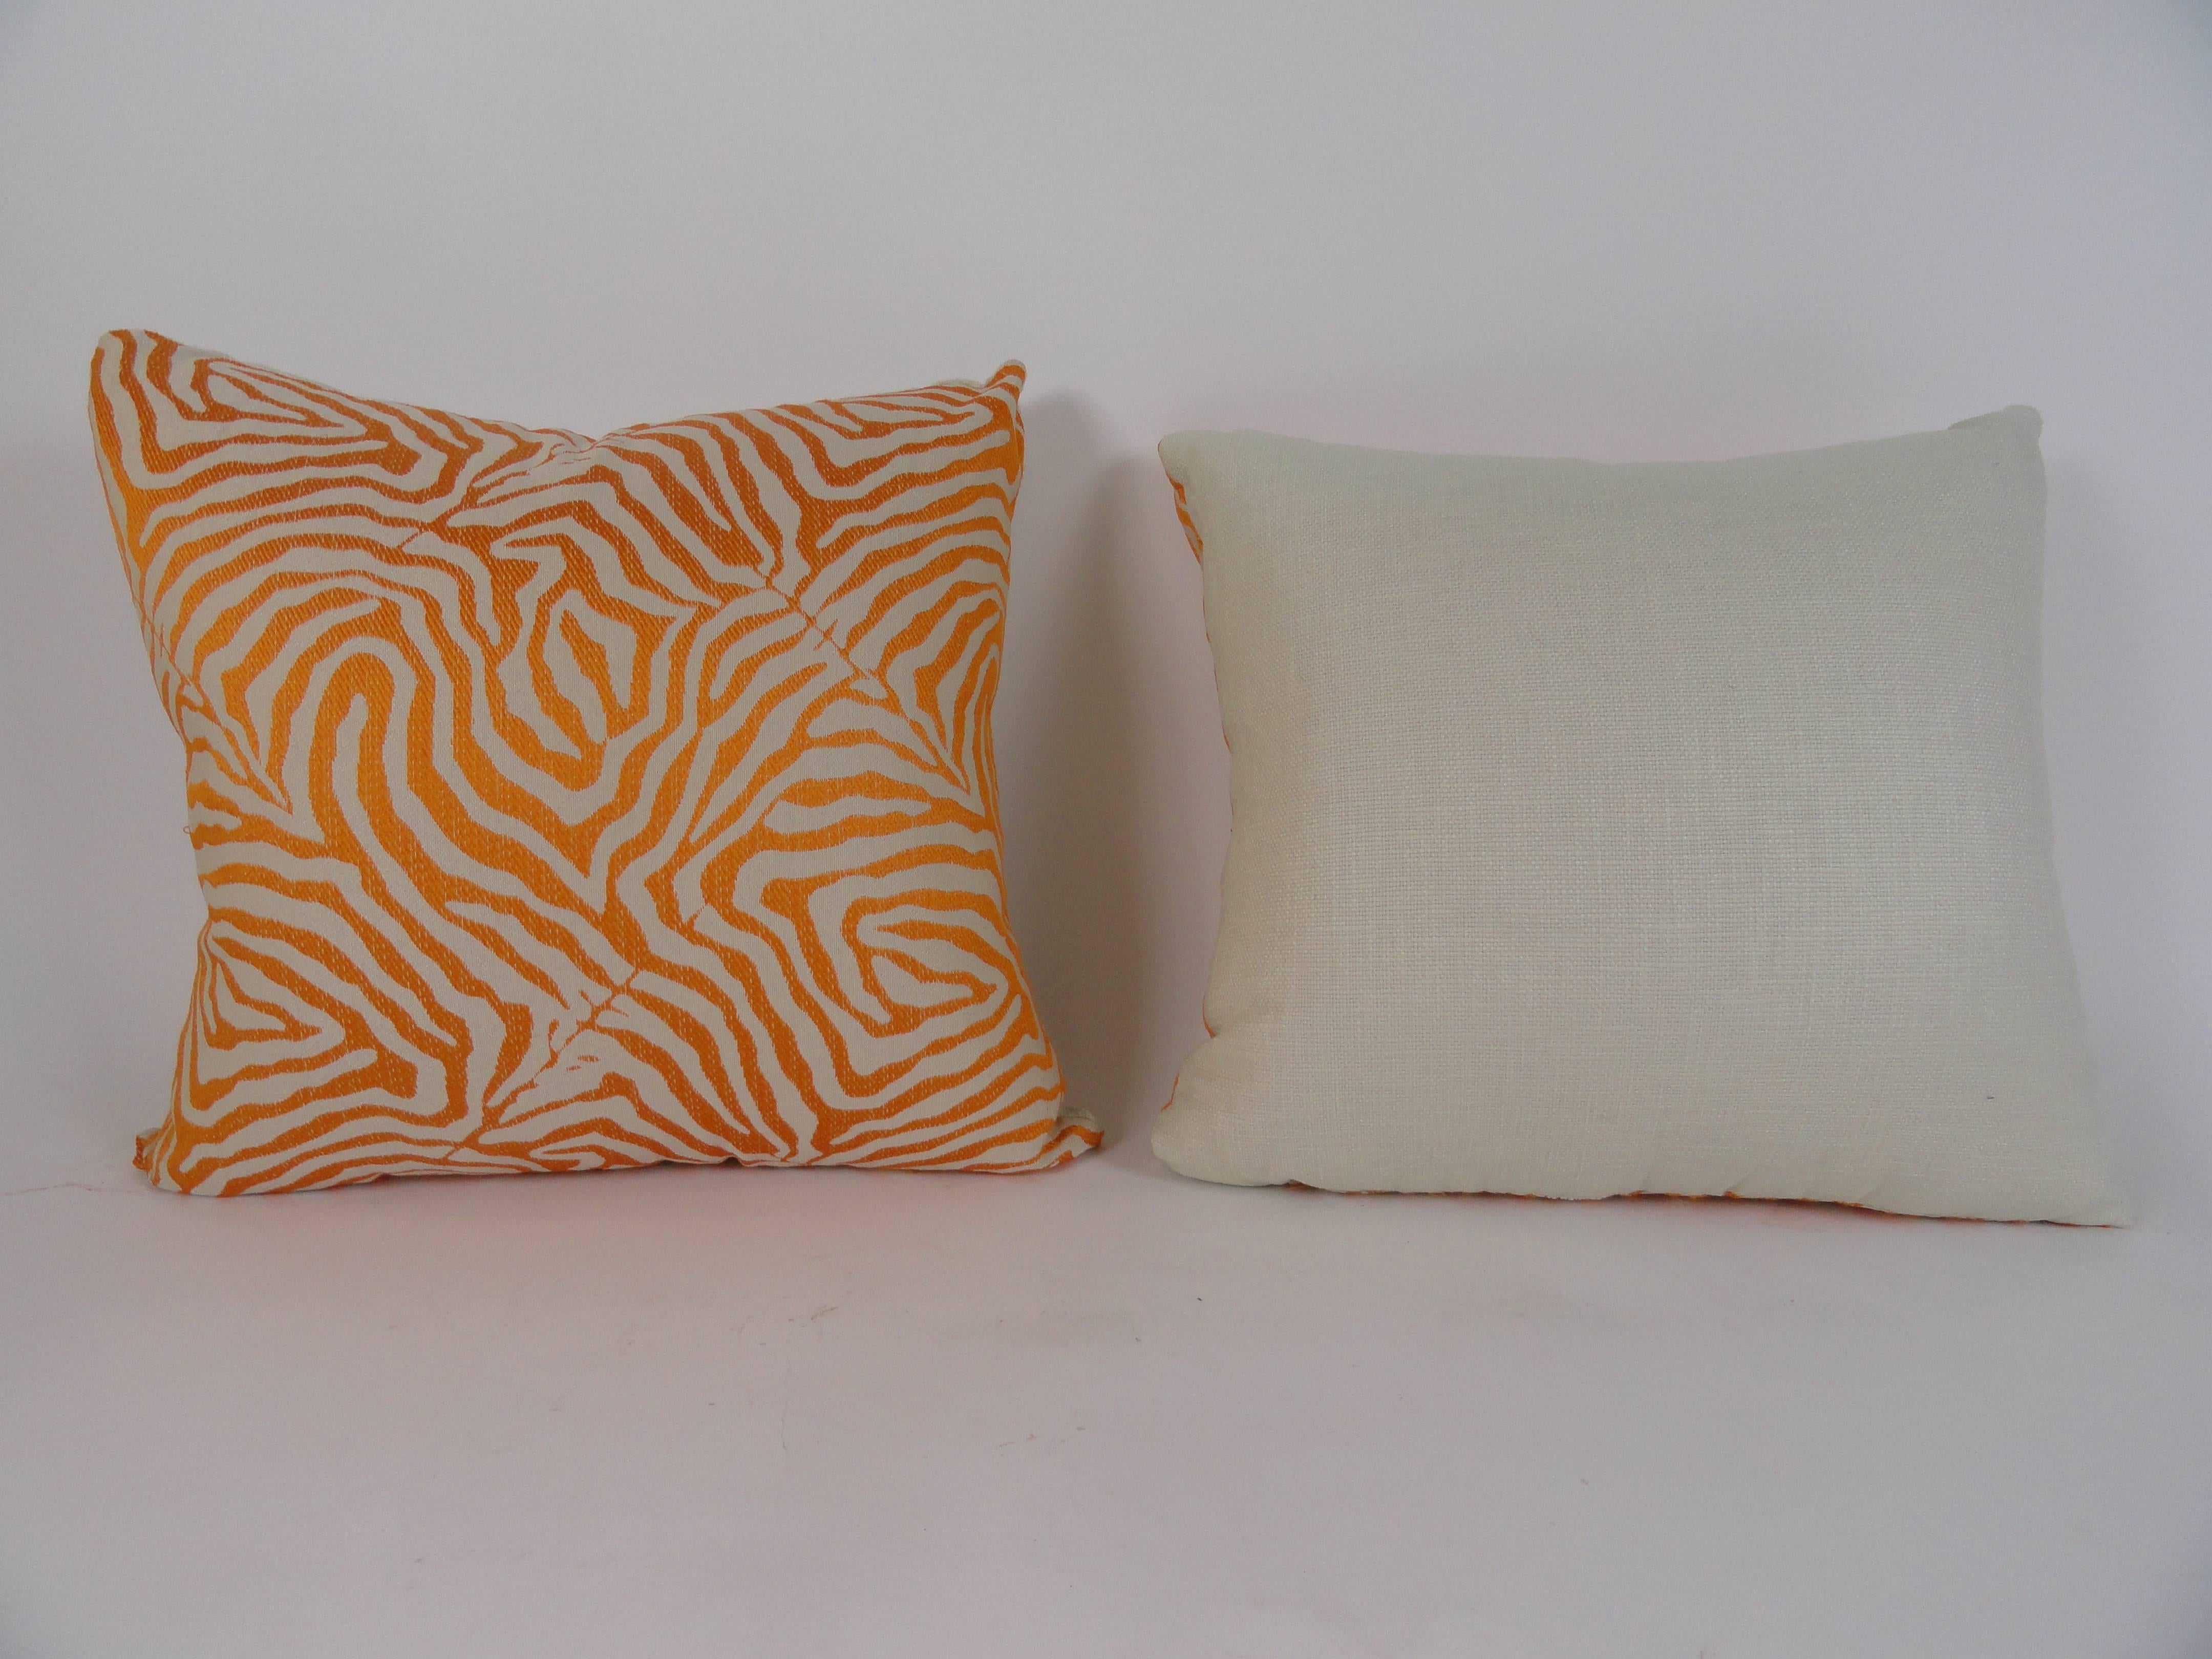 Pair of orange and beige zebra print pillows with beige cotton backing. 80/20 down filled. 24